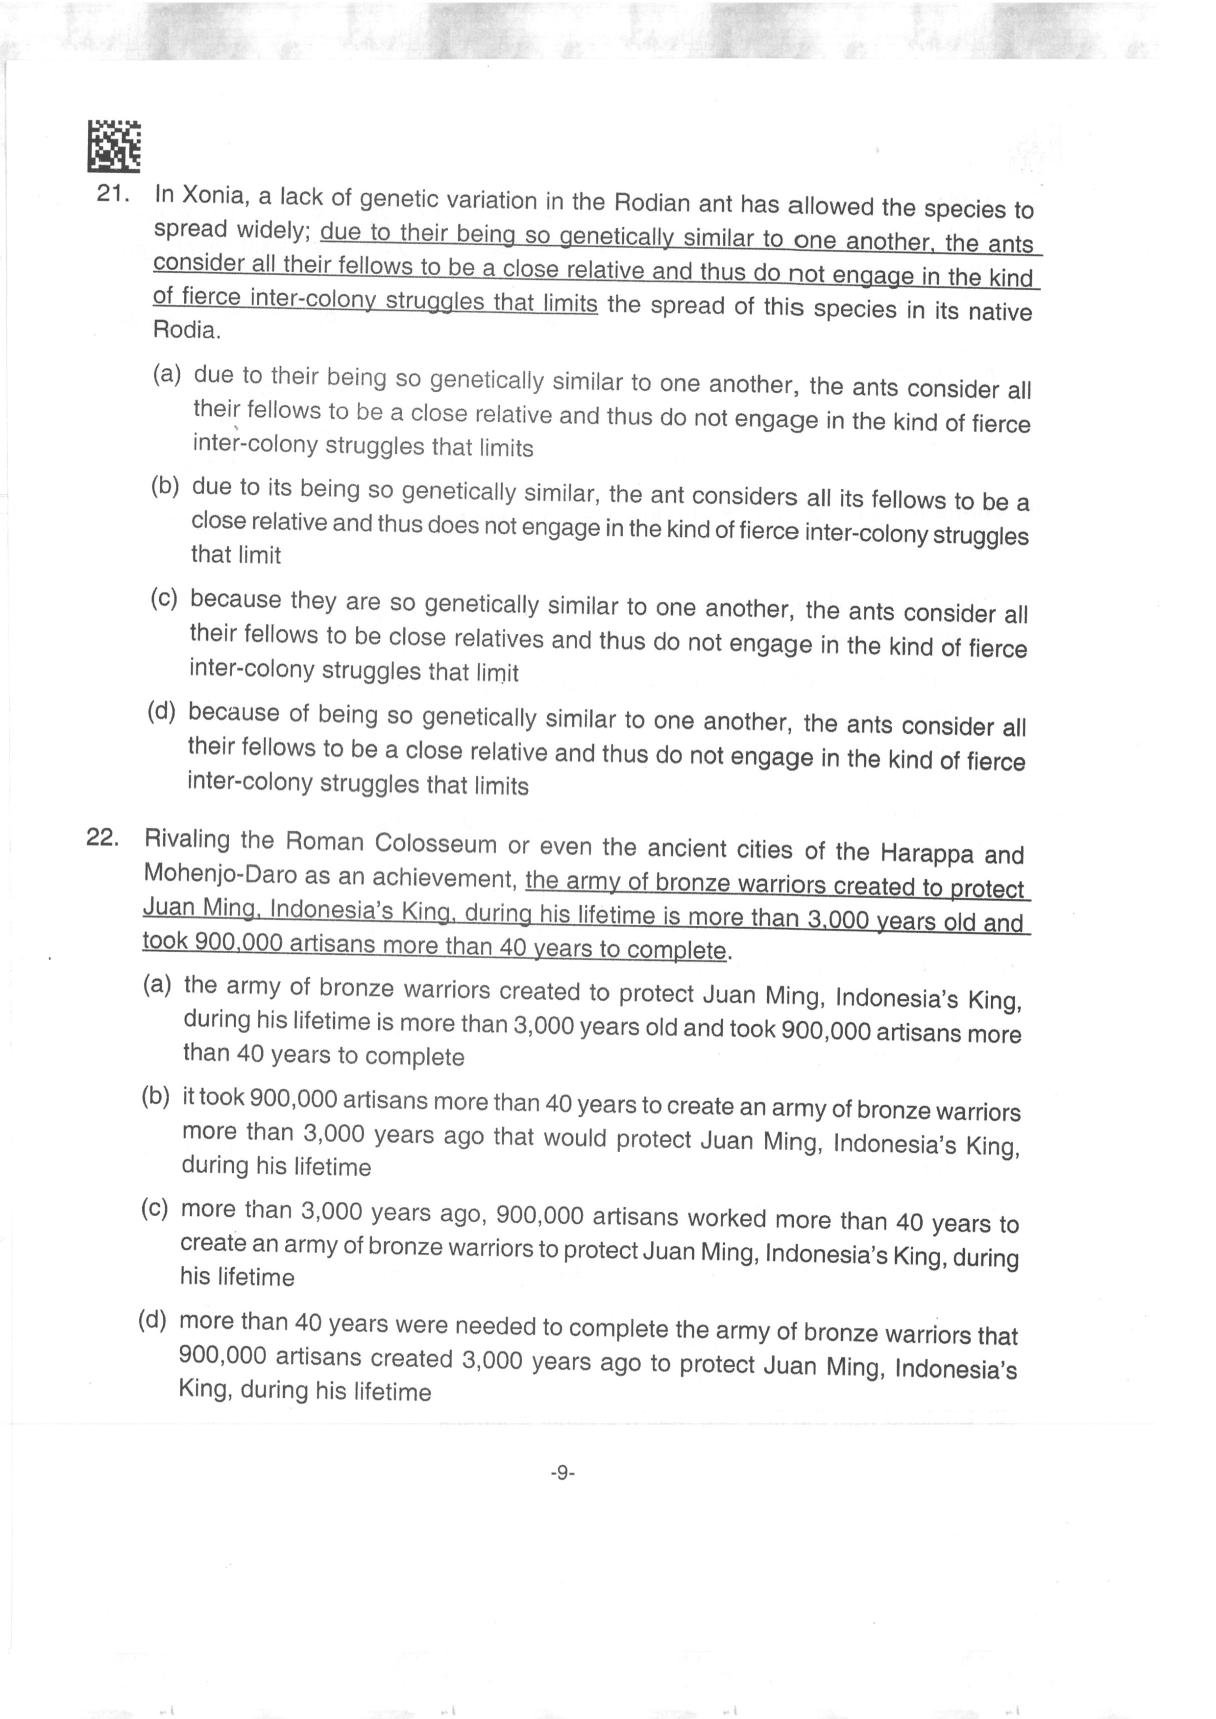 AILET 2019 Question Paper for BA LLB - Page 9